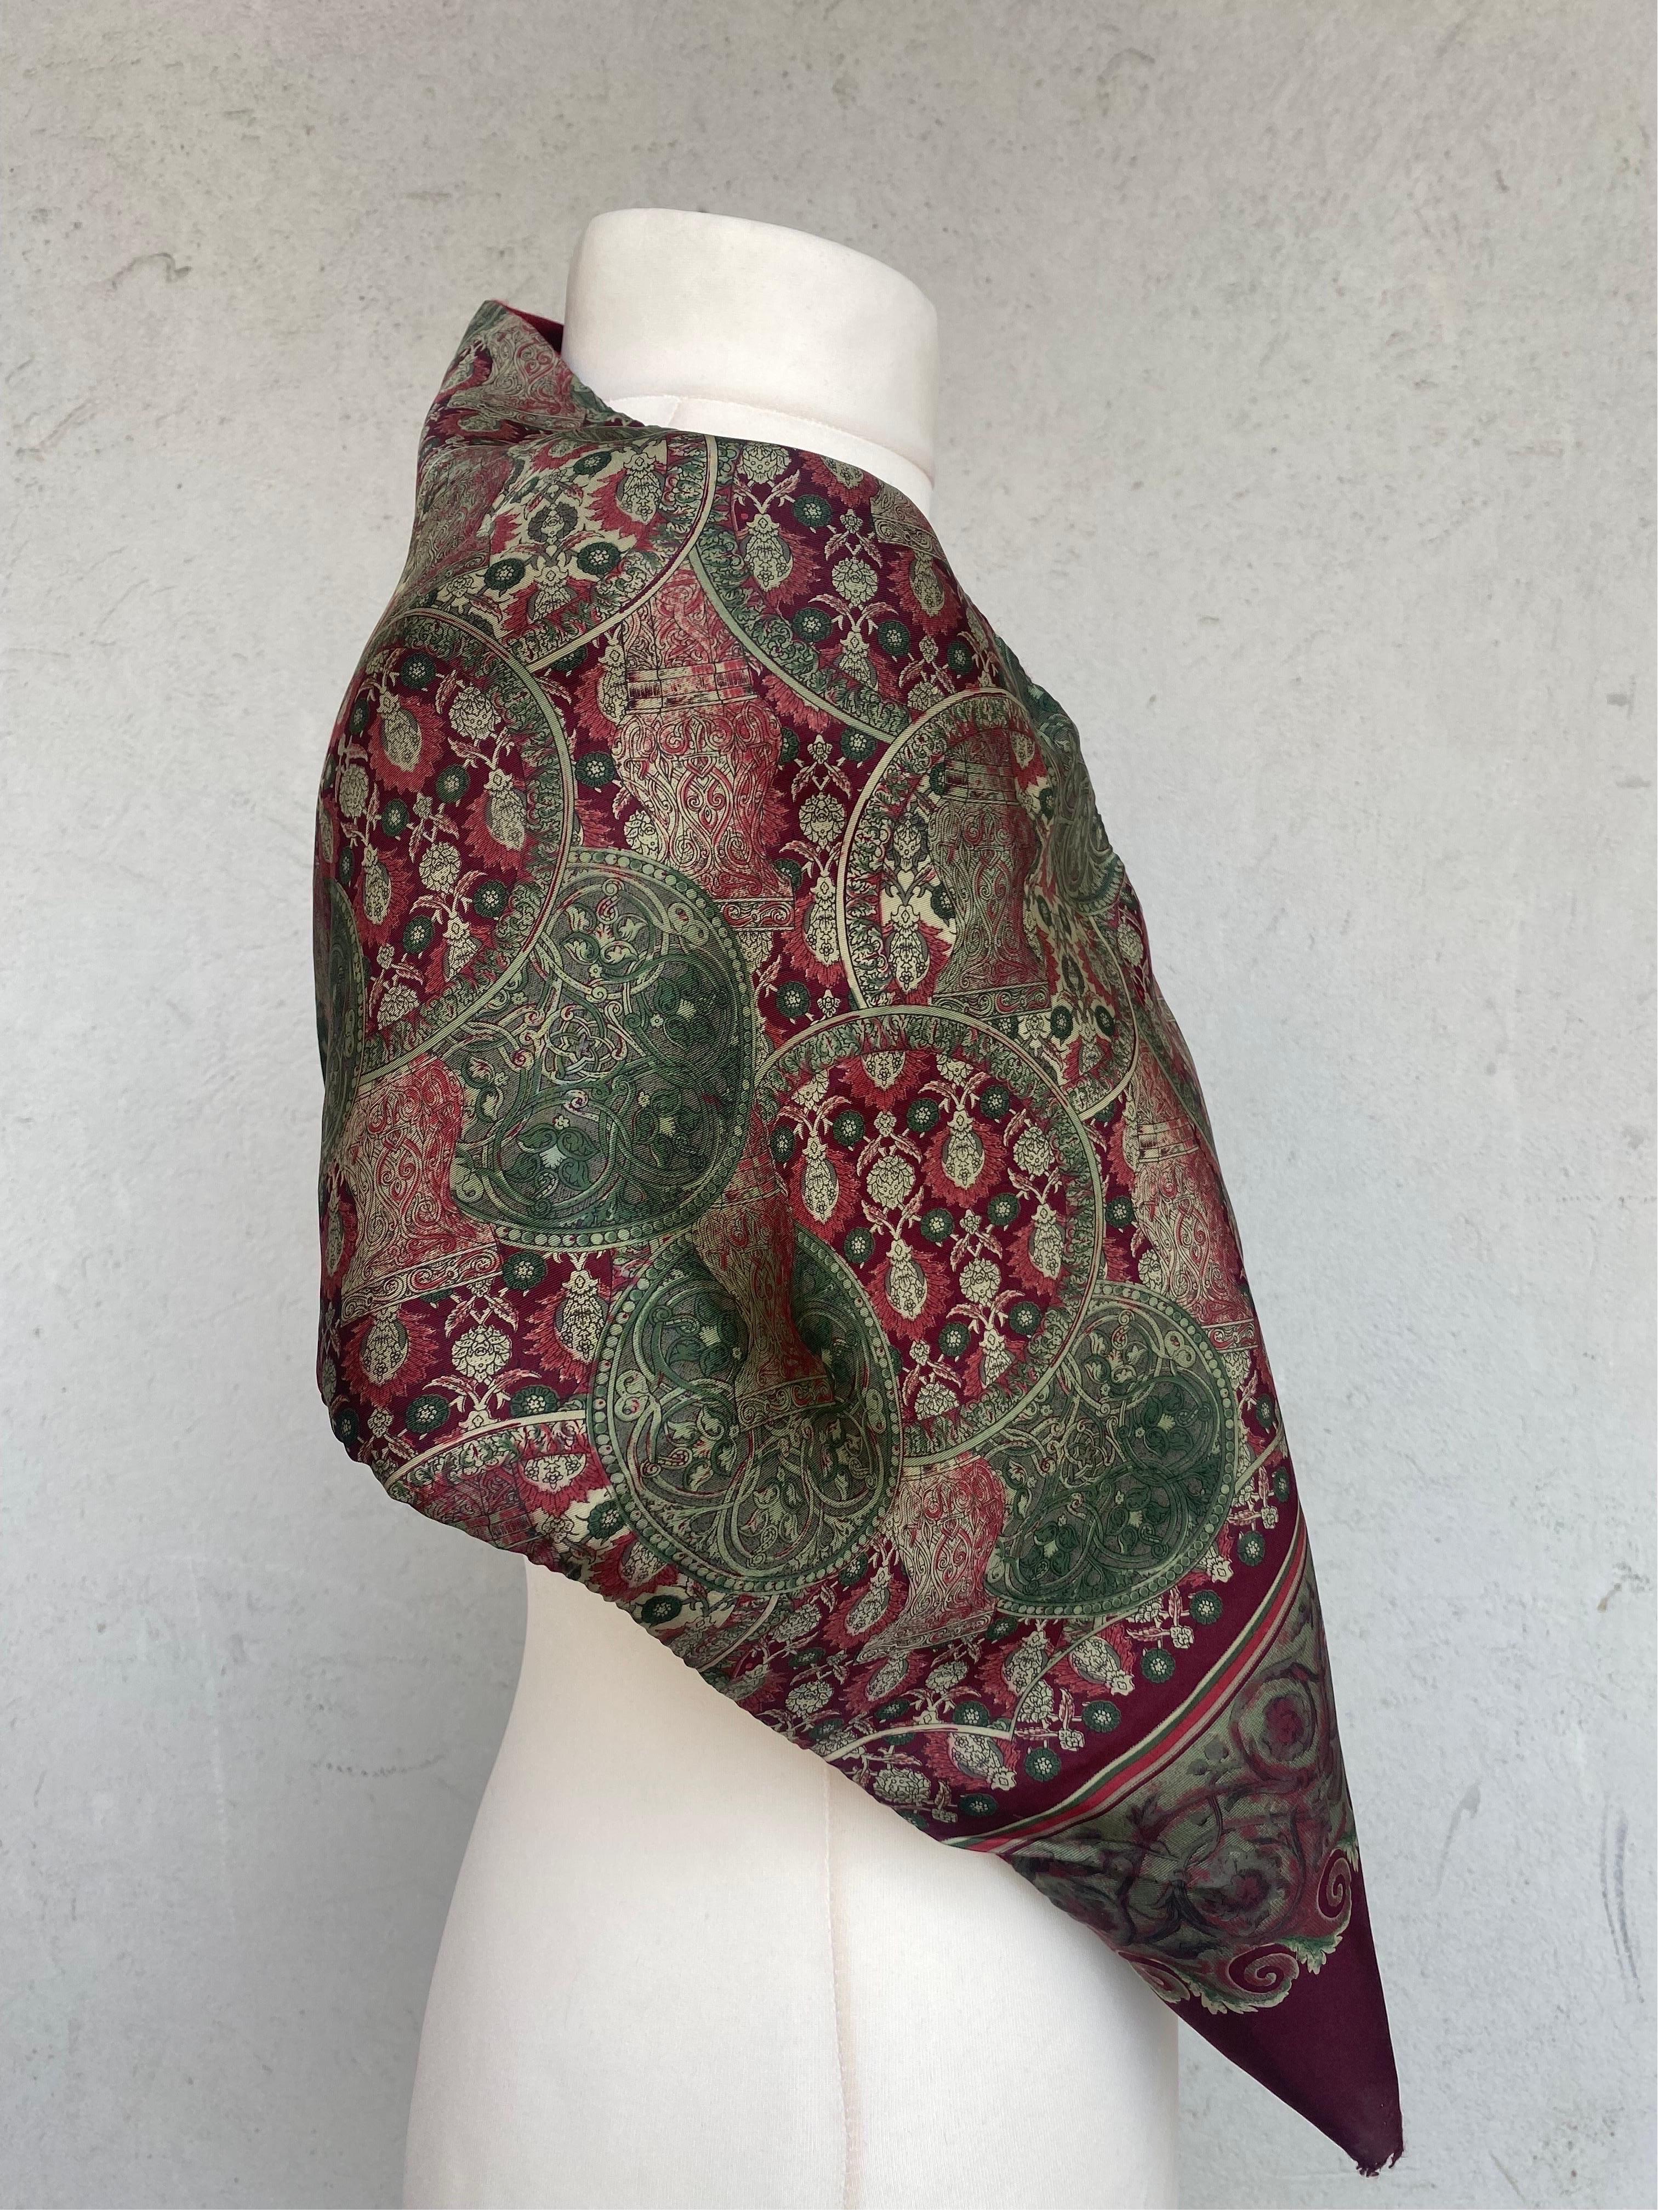 Dior Monsieur burgundy scarf
Christian Dior Monsieur elegant scarf in silk and wool.
On one side burgundy in wool and on the other green patterned in silk.
Length 135
Height 26
In good general condition. It shows signs of normal use.
Towards the